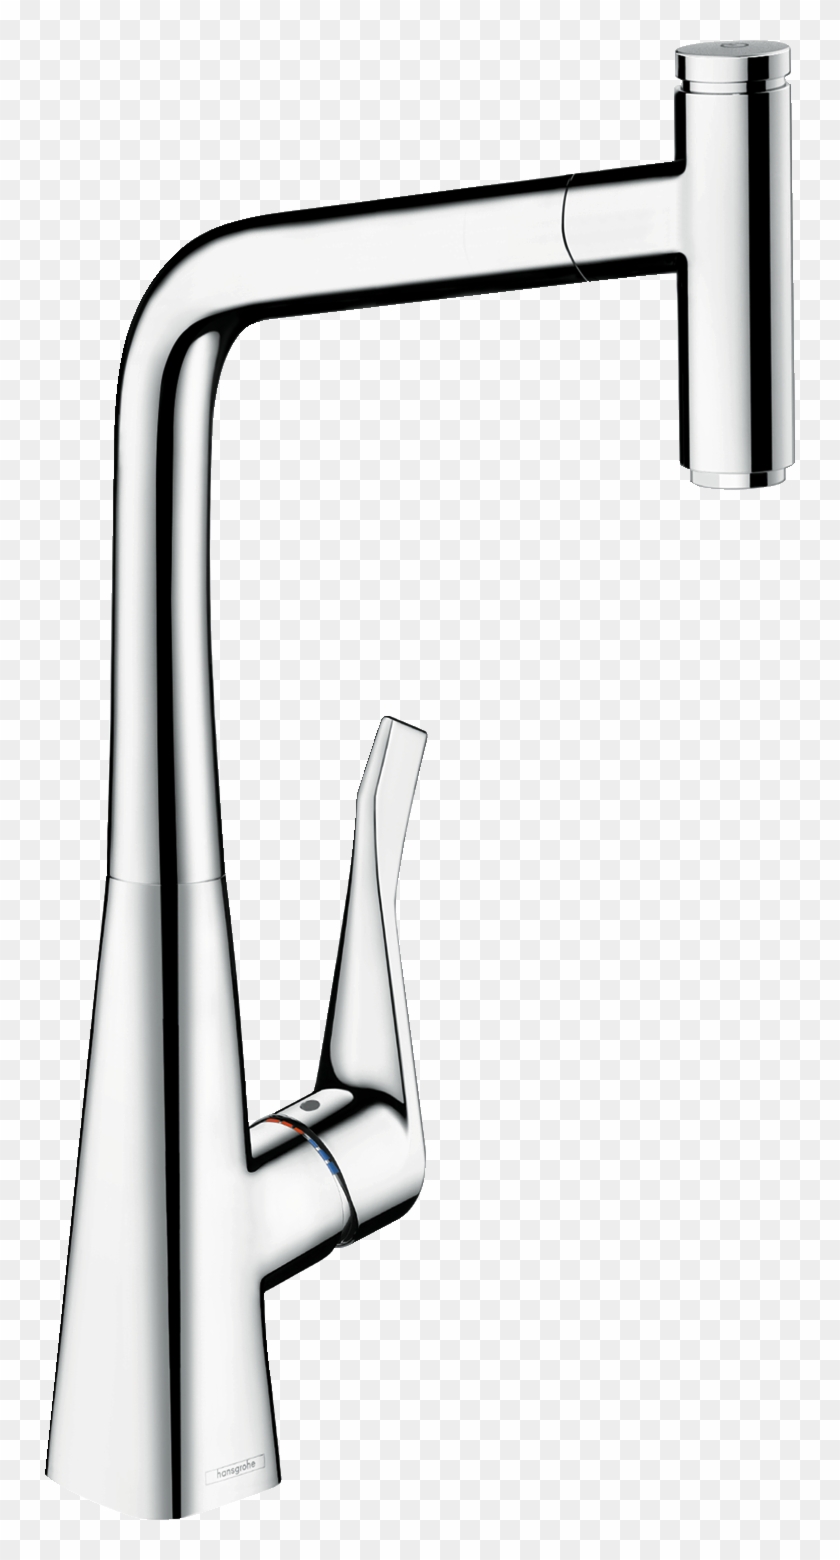 All Kitchen Faucets With Select Technology - All Kitchen Faucets With Select Technology #1520246